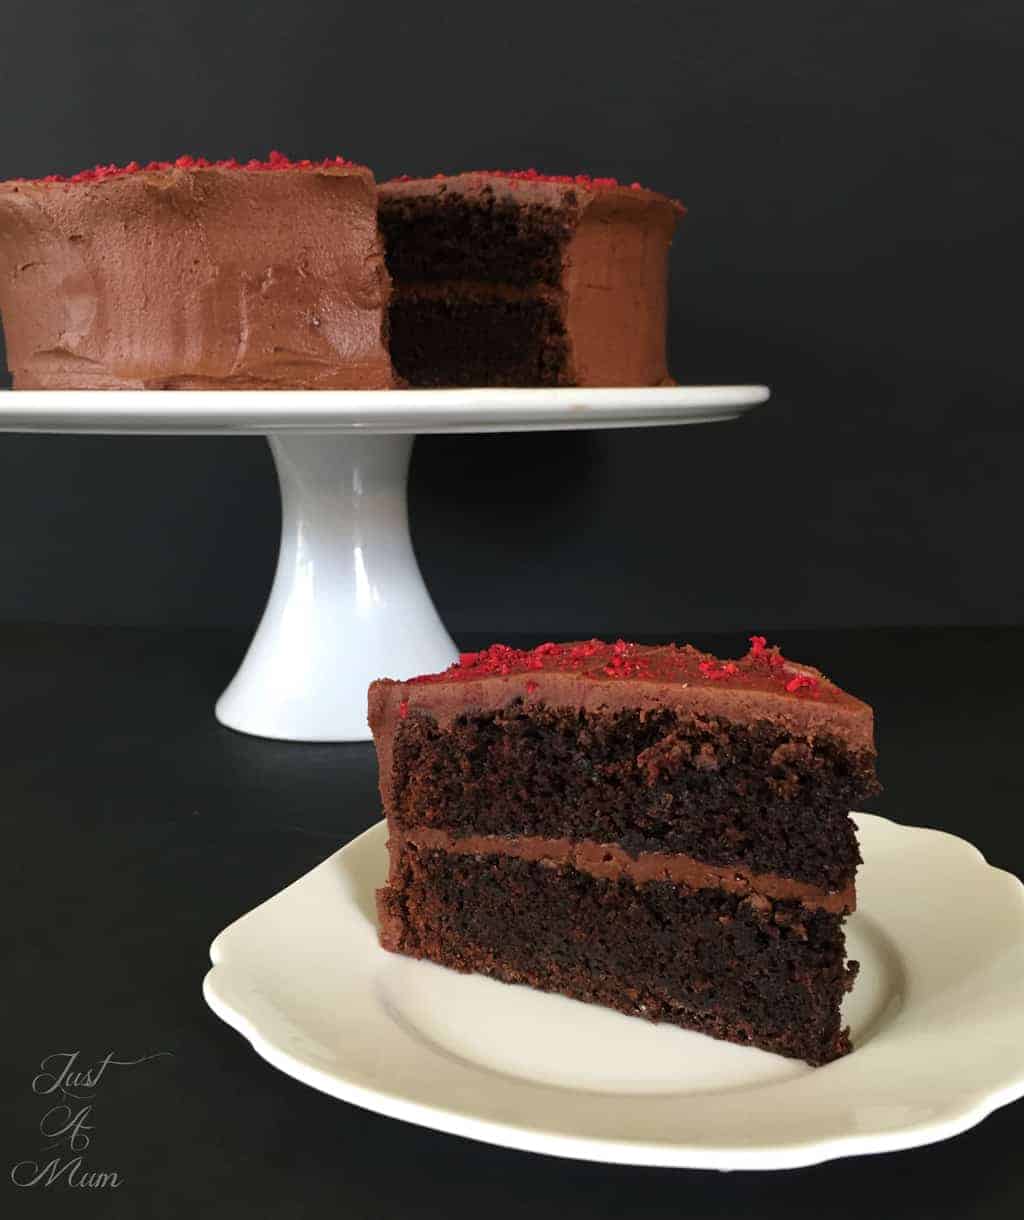 Just A Mum's Beetroot Chocolate Cake 